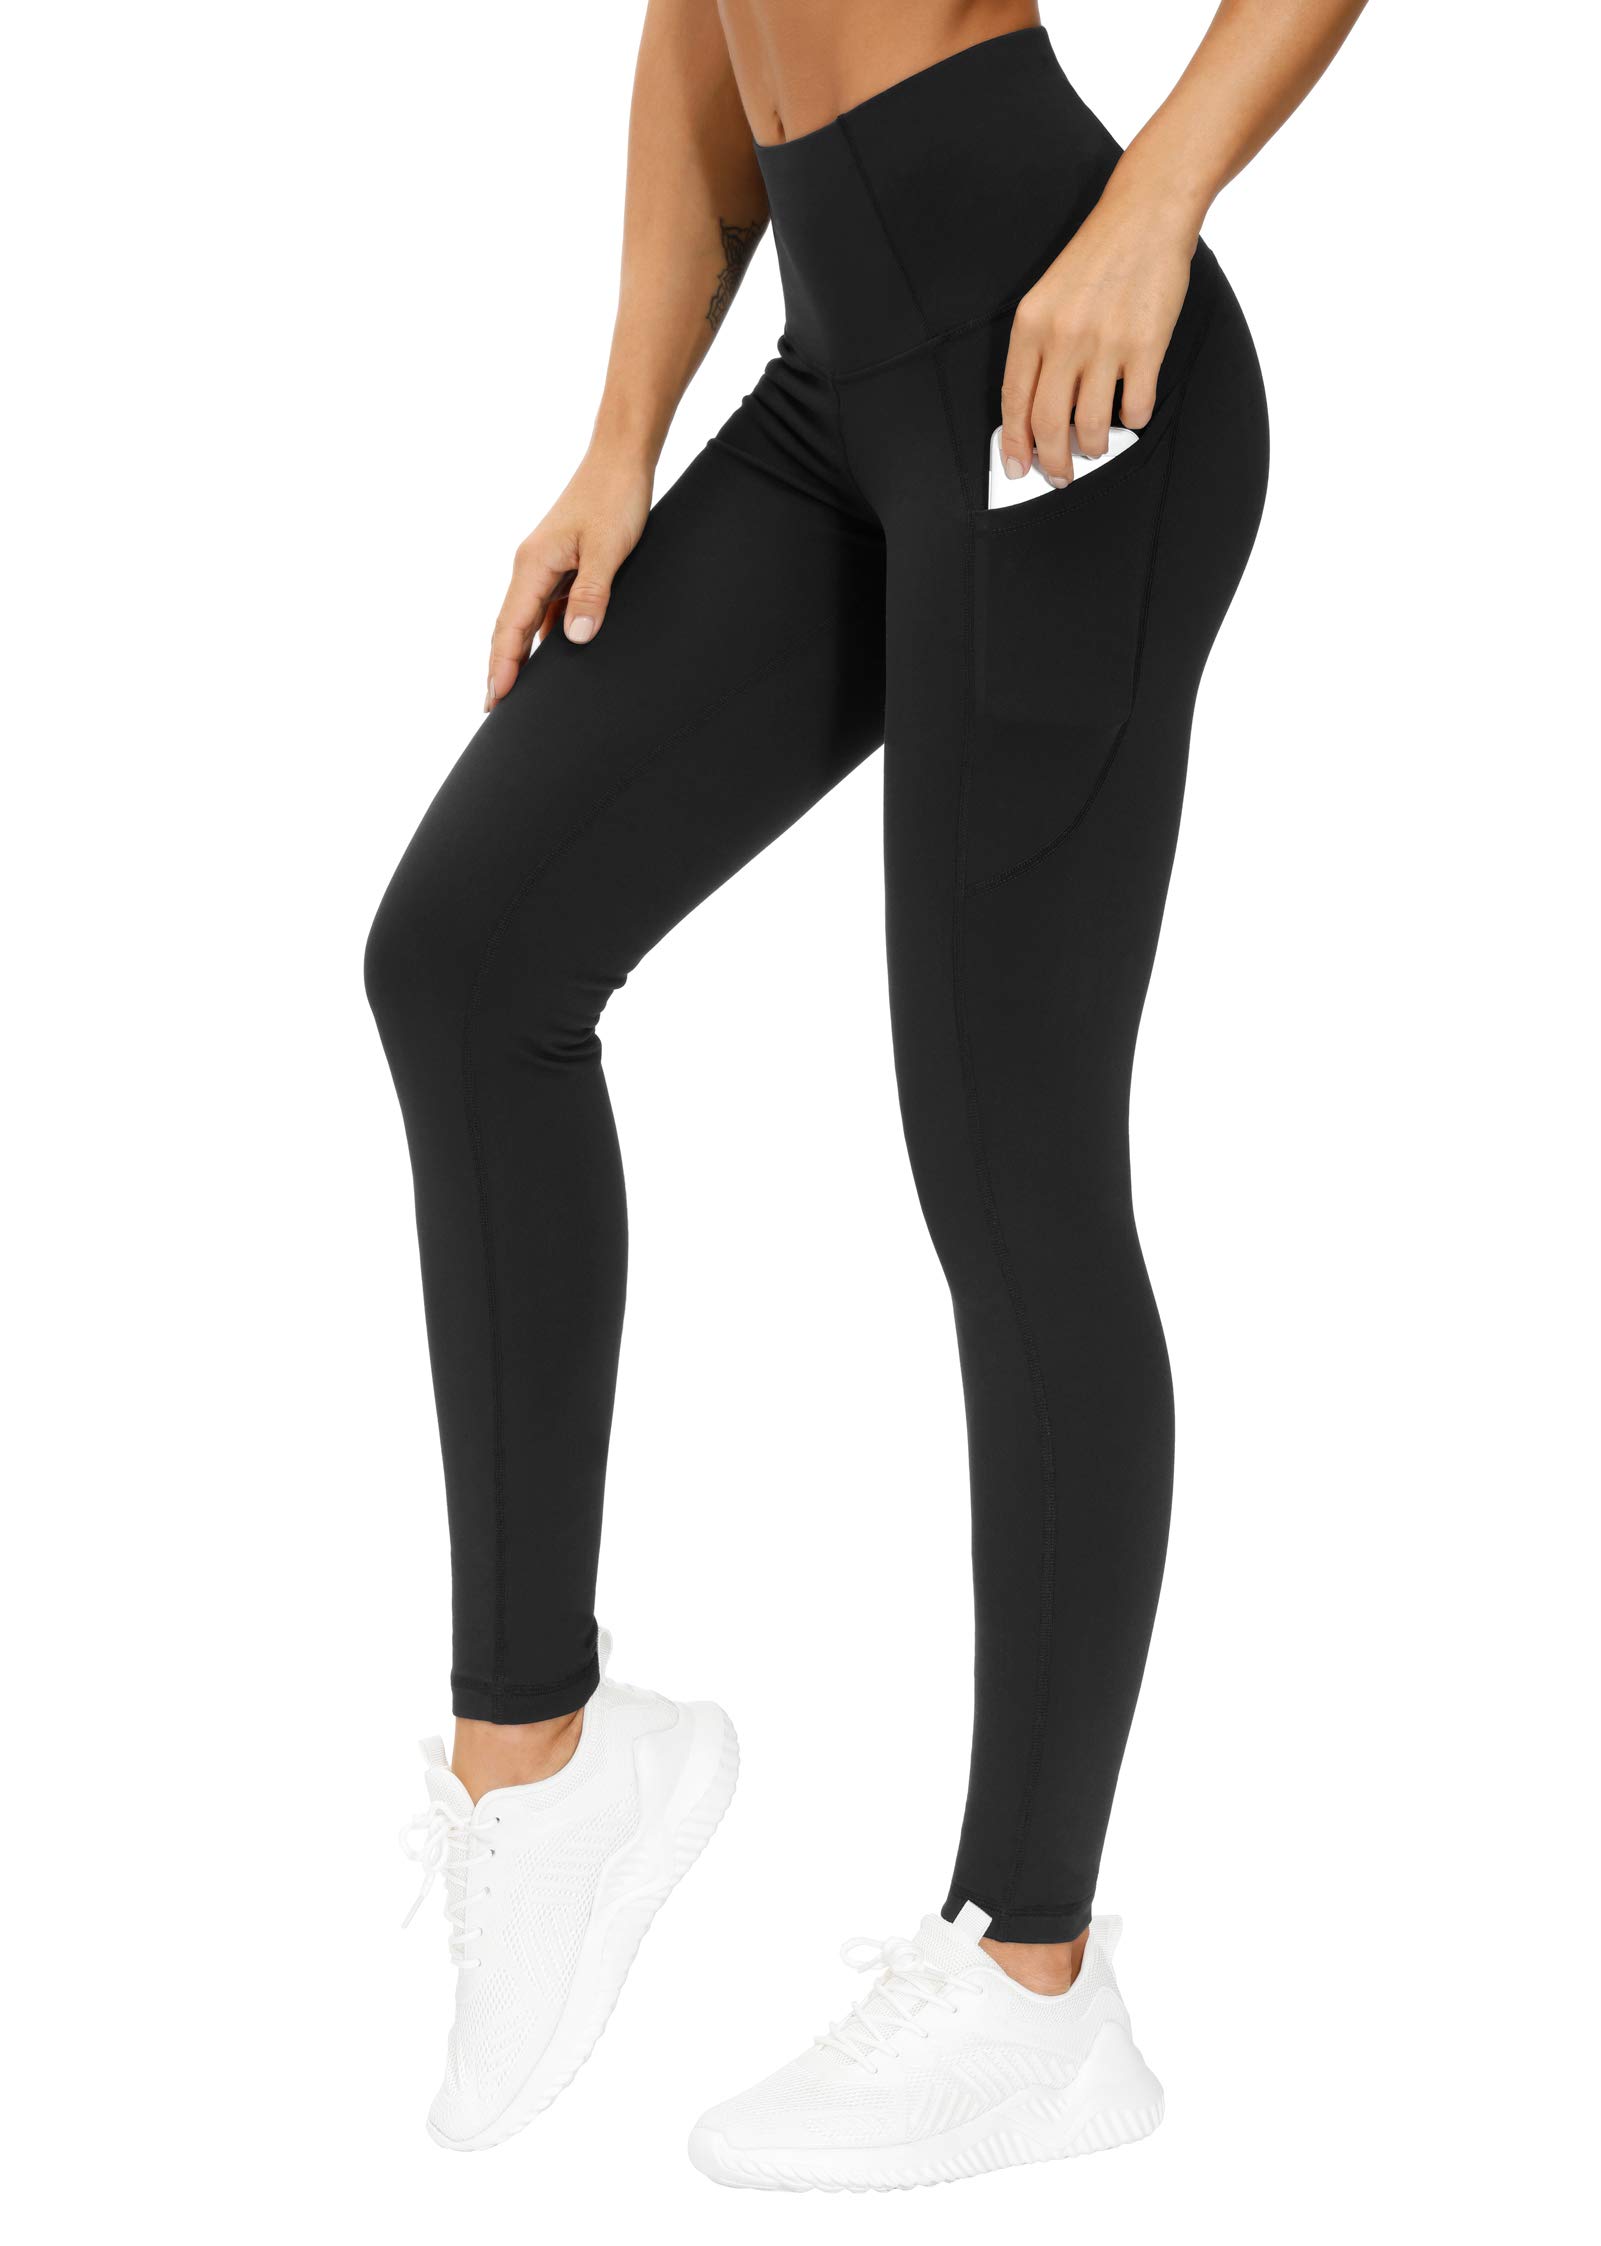 Book Cover THE GYM PEOPLE Thick High Waist Yoga Pants with Pockets, Tummy Control Workout Running Yoga Leggings for Women X-Small Black